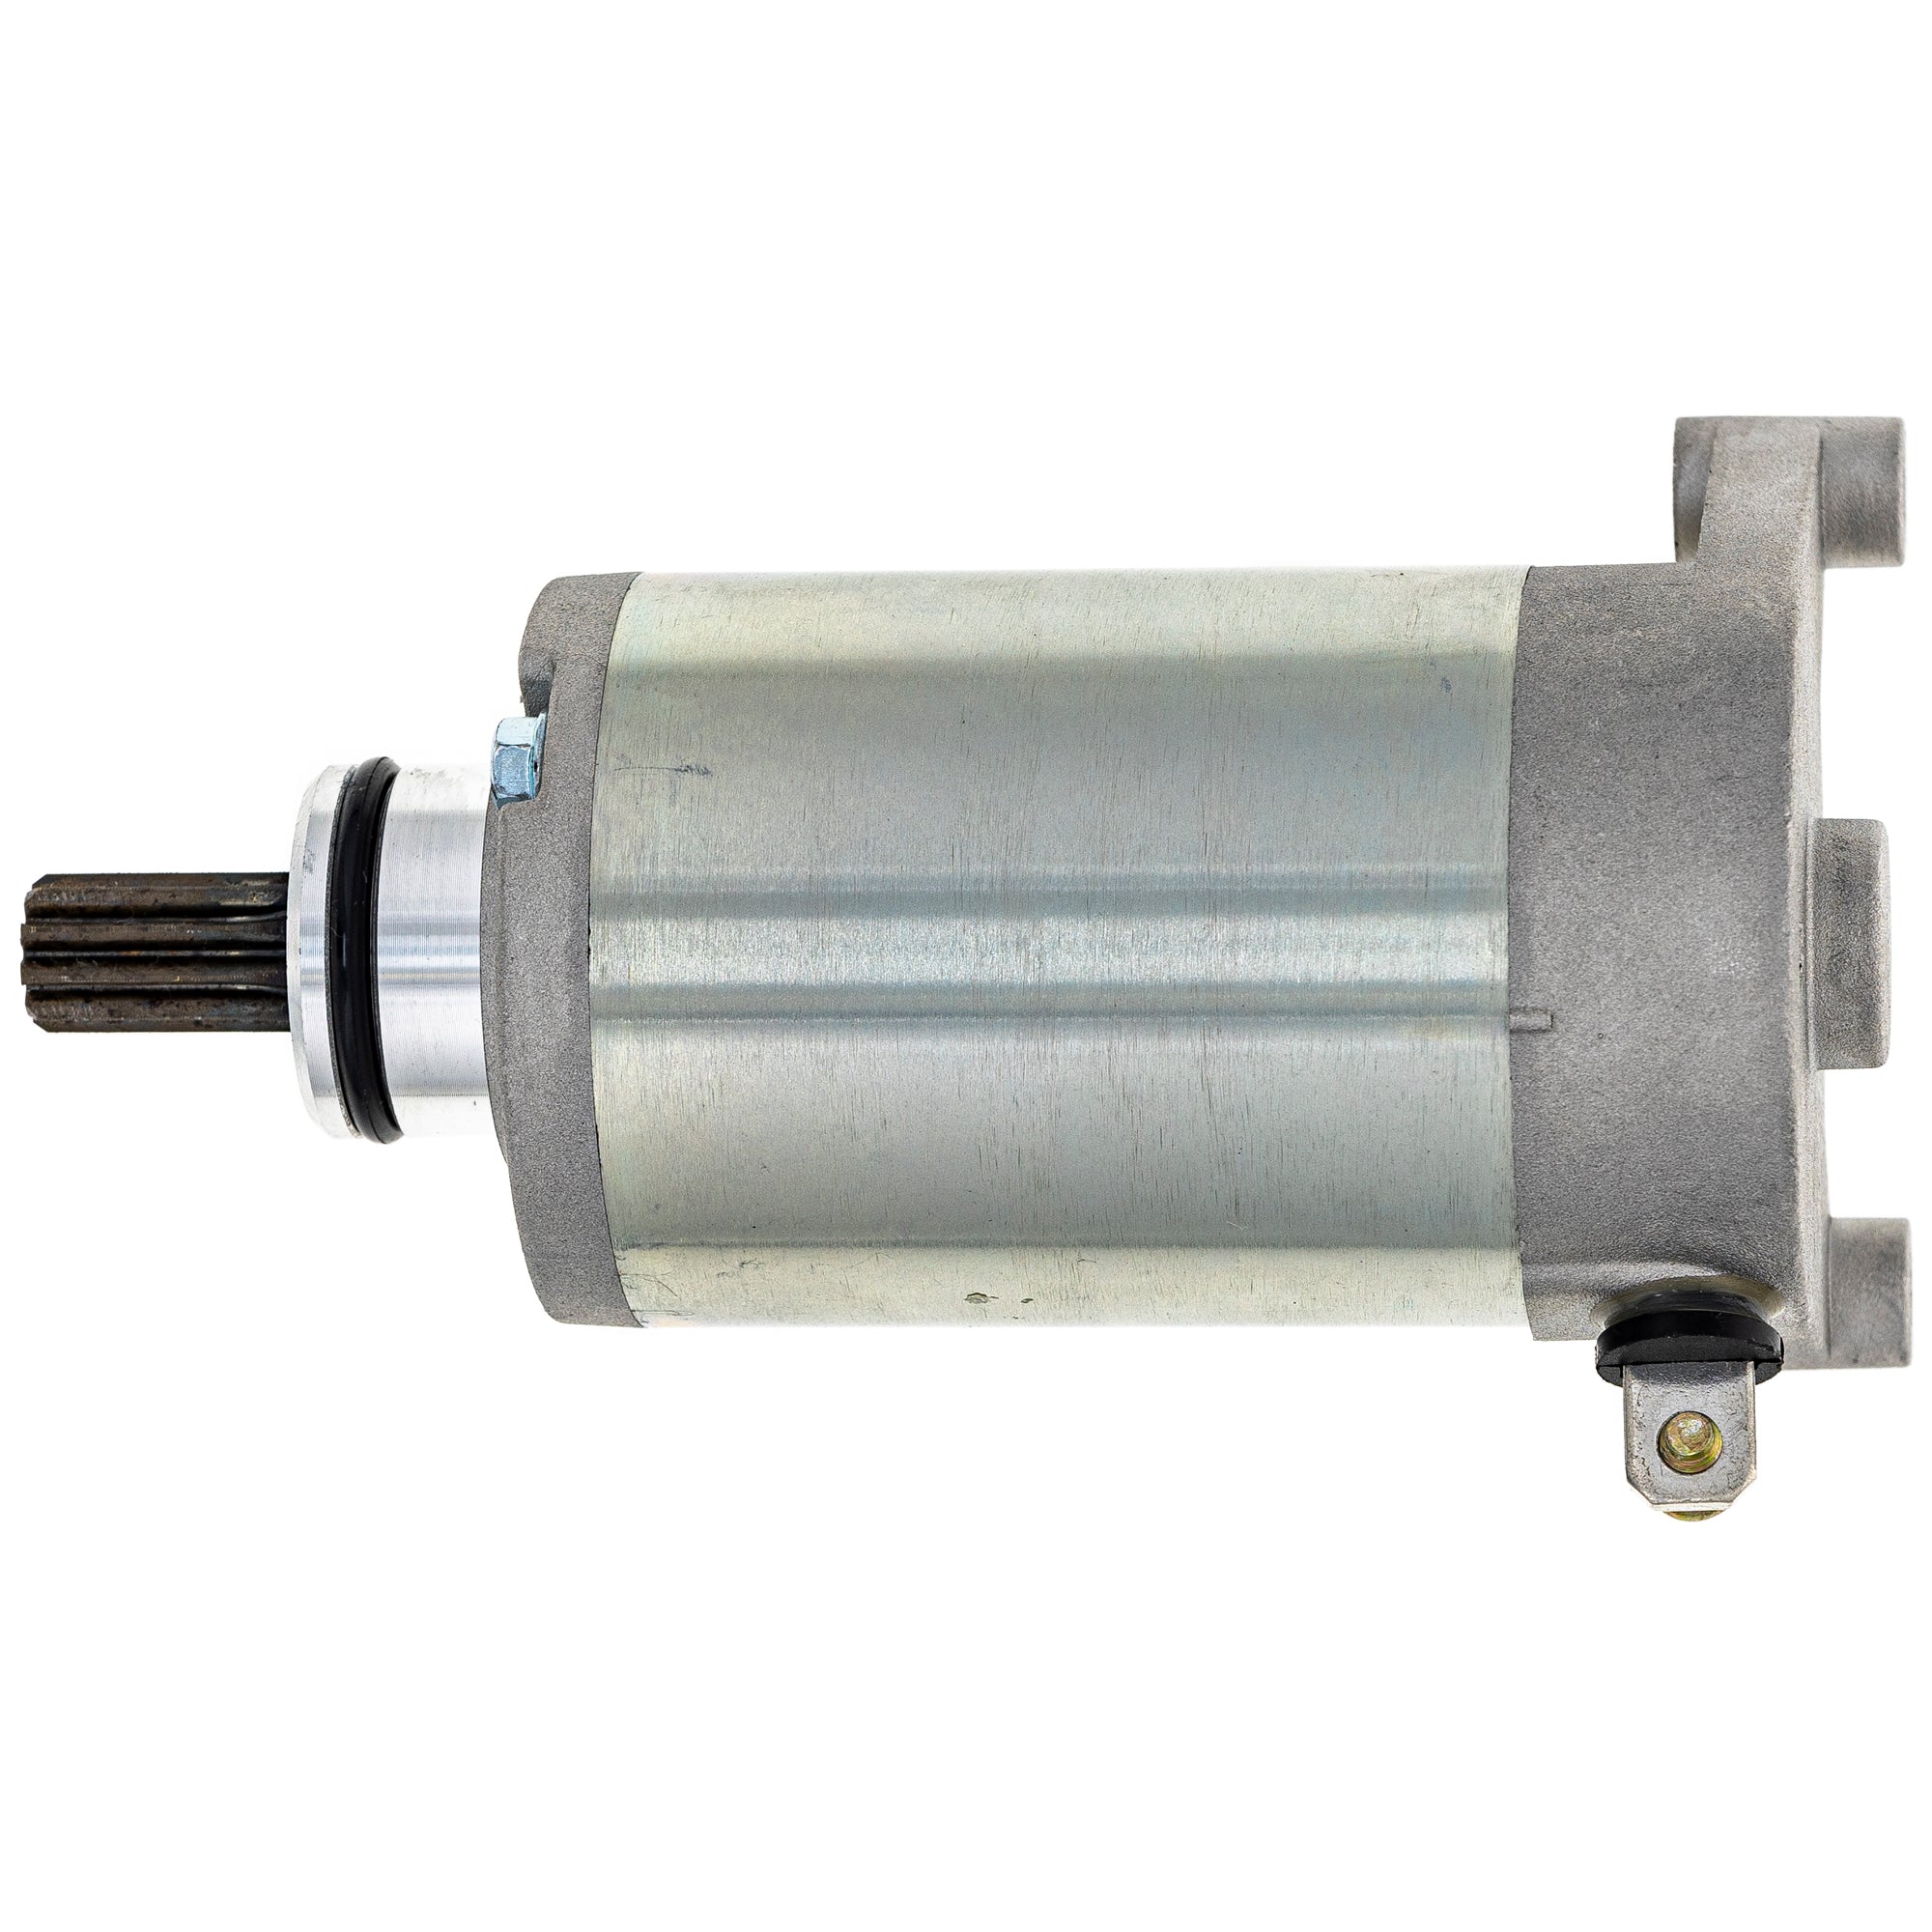 NICHE 519-CSM2408O Starter Motor Assembly for zOTHER